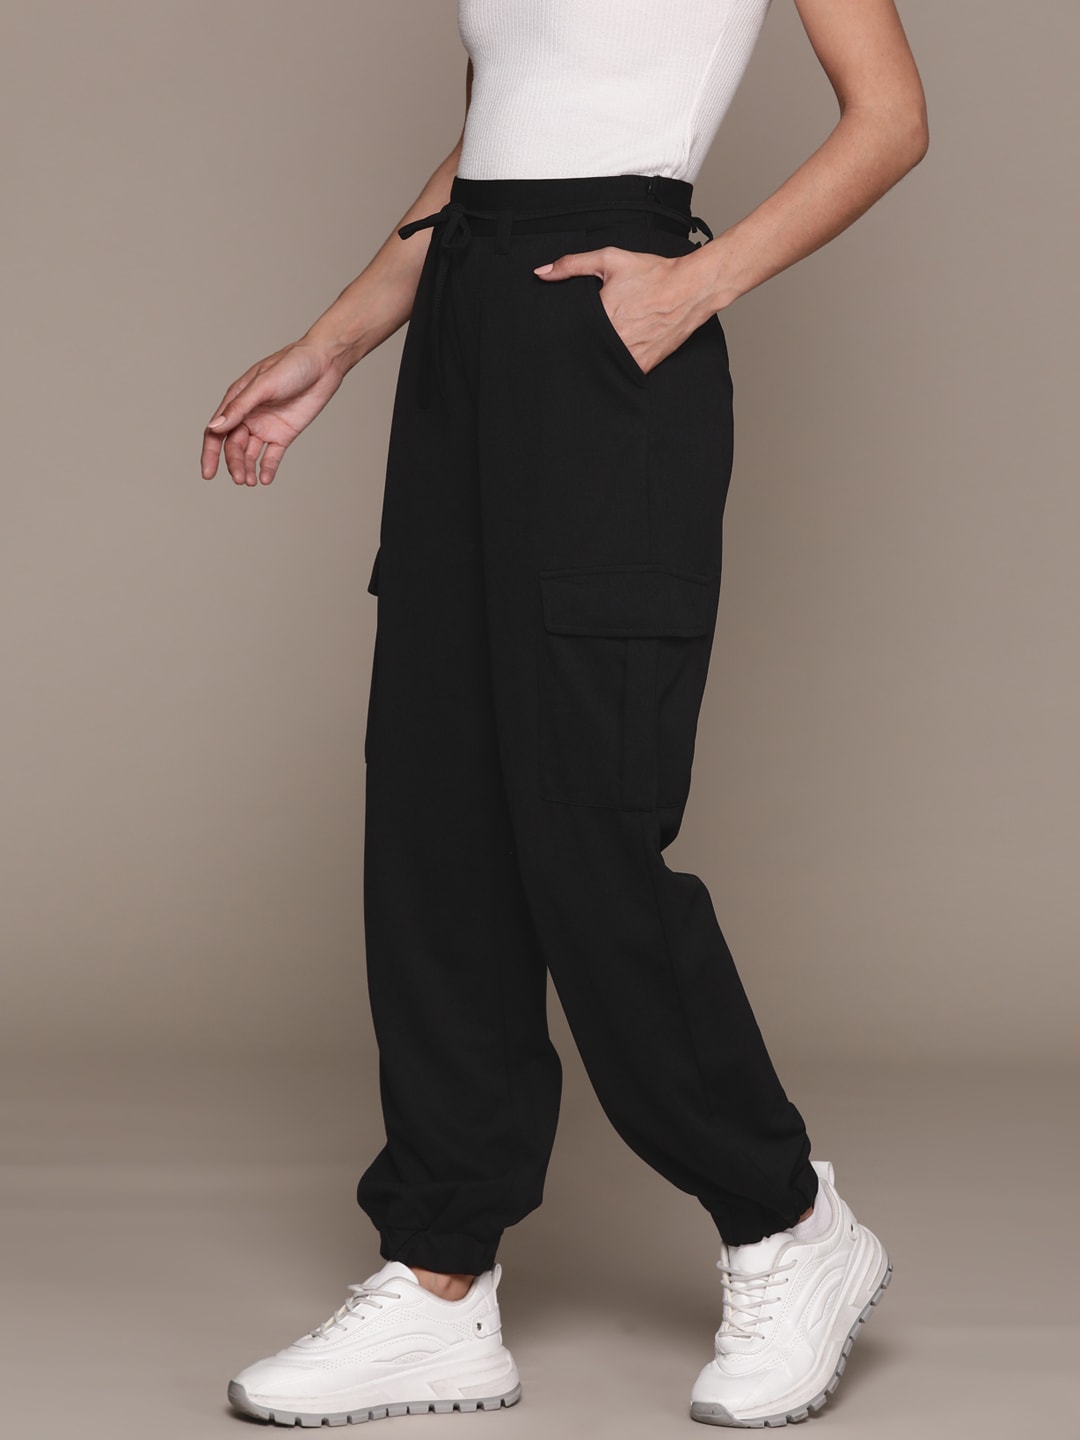 The Roadster Lifestyle Co. Women Pleated Cargos Joggers Price in India